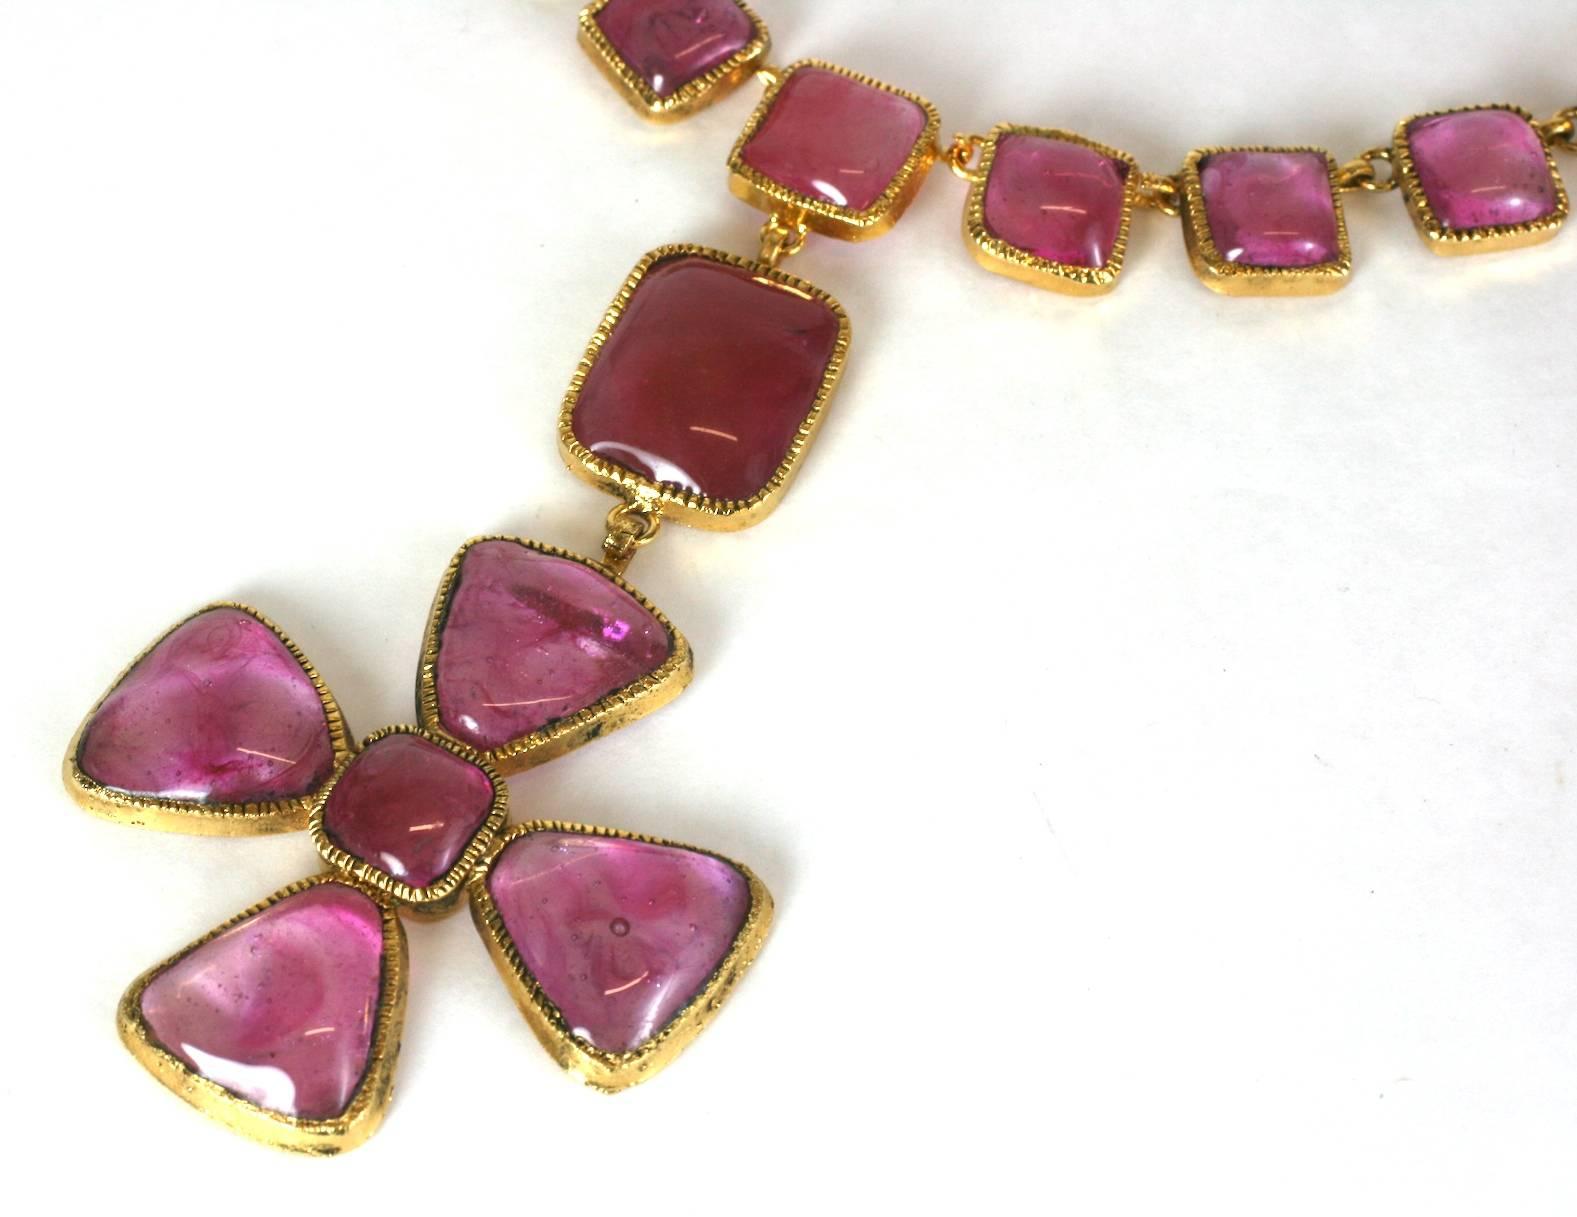 Chanel Byzantine style pale pink ruby collet set pate de verre poured glass necklace by Maison Gripoix.
The handmade gilt bronze Maltese cross pendant, with square and rectangular links randomly set with varying shades of the faux glass rubies, a